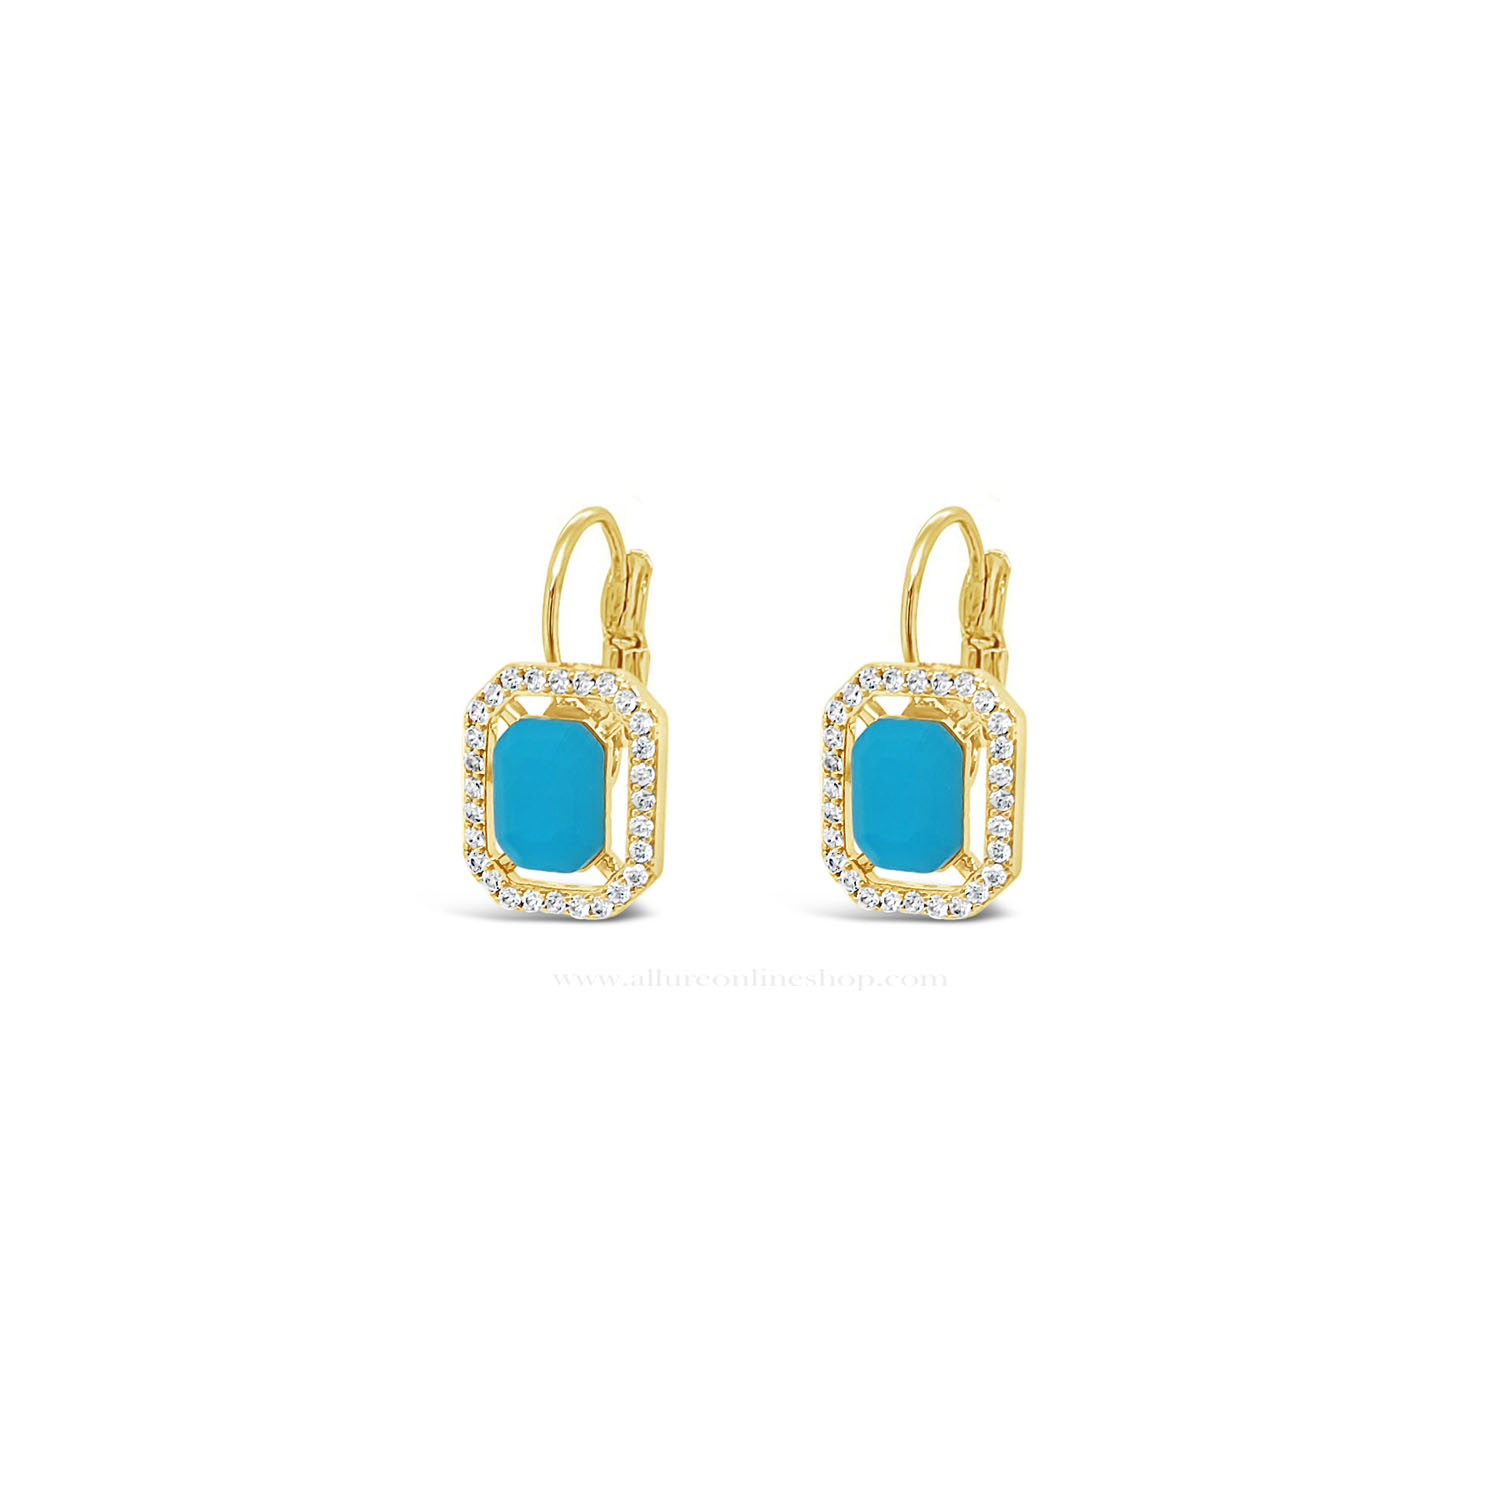 Absolute Tourquoise Earrings Gold - Allure Online Shop